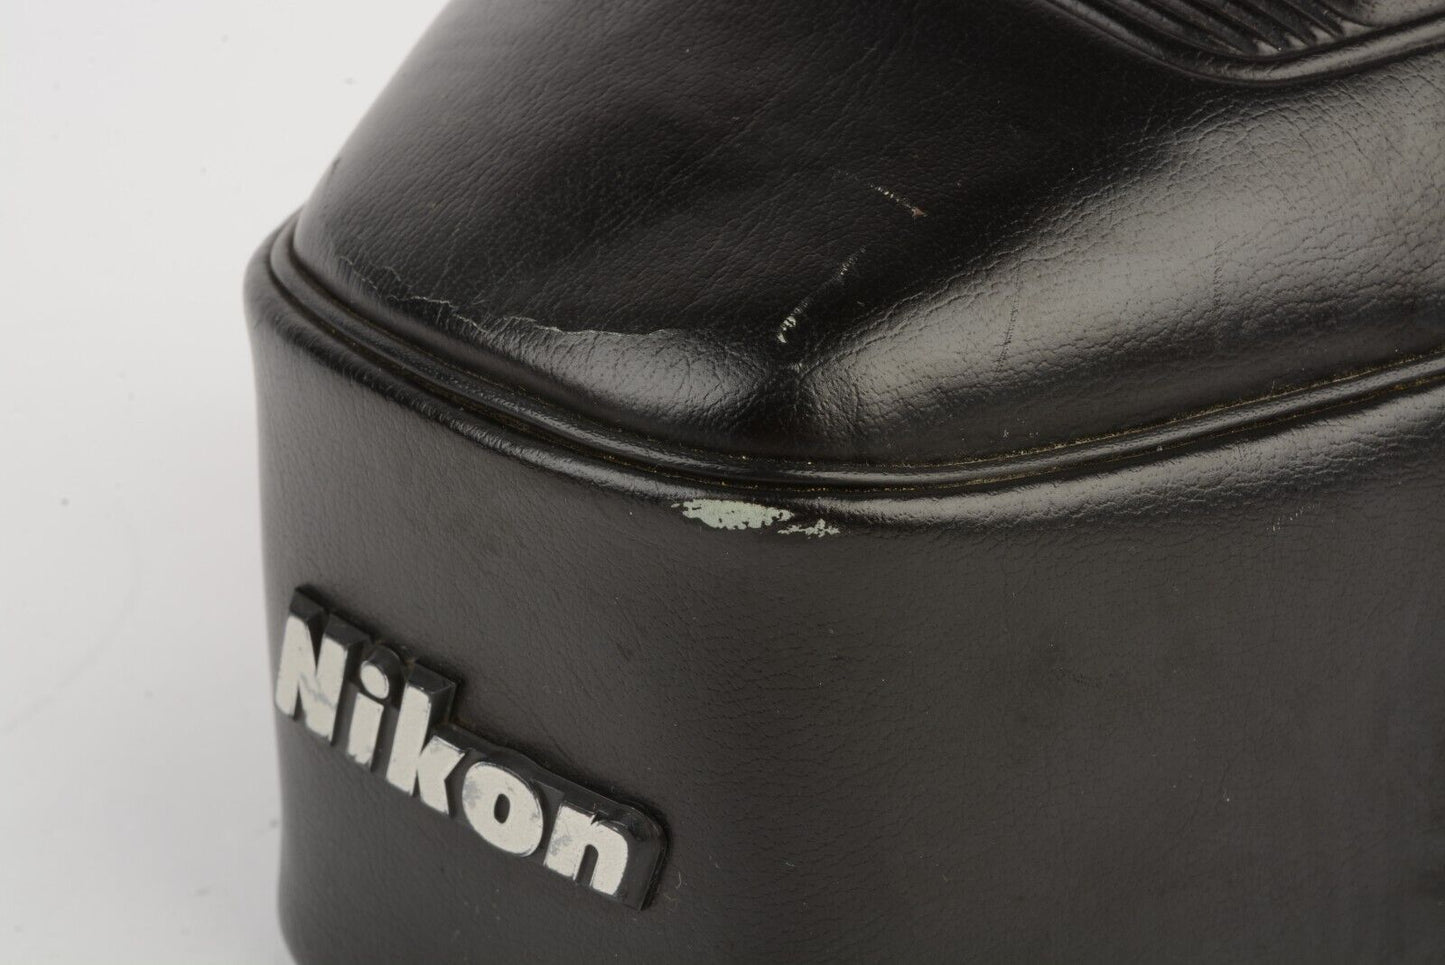 EXC++ GENUINE NIKON CF-32 EVEREADY FITTED CASE FOR NIKON FG20, VERY CLEAN